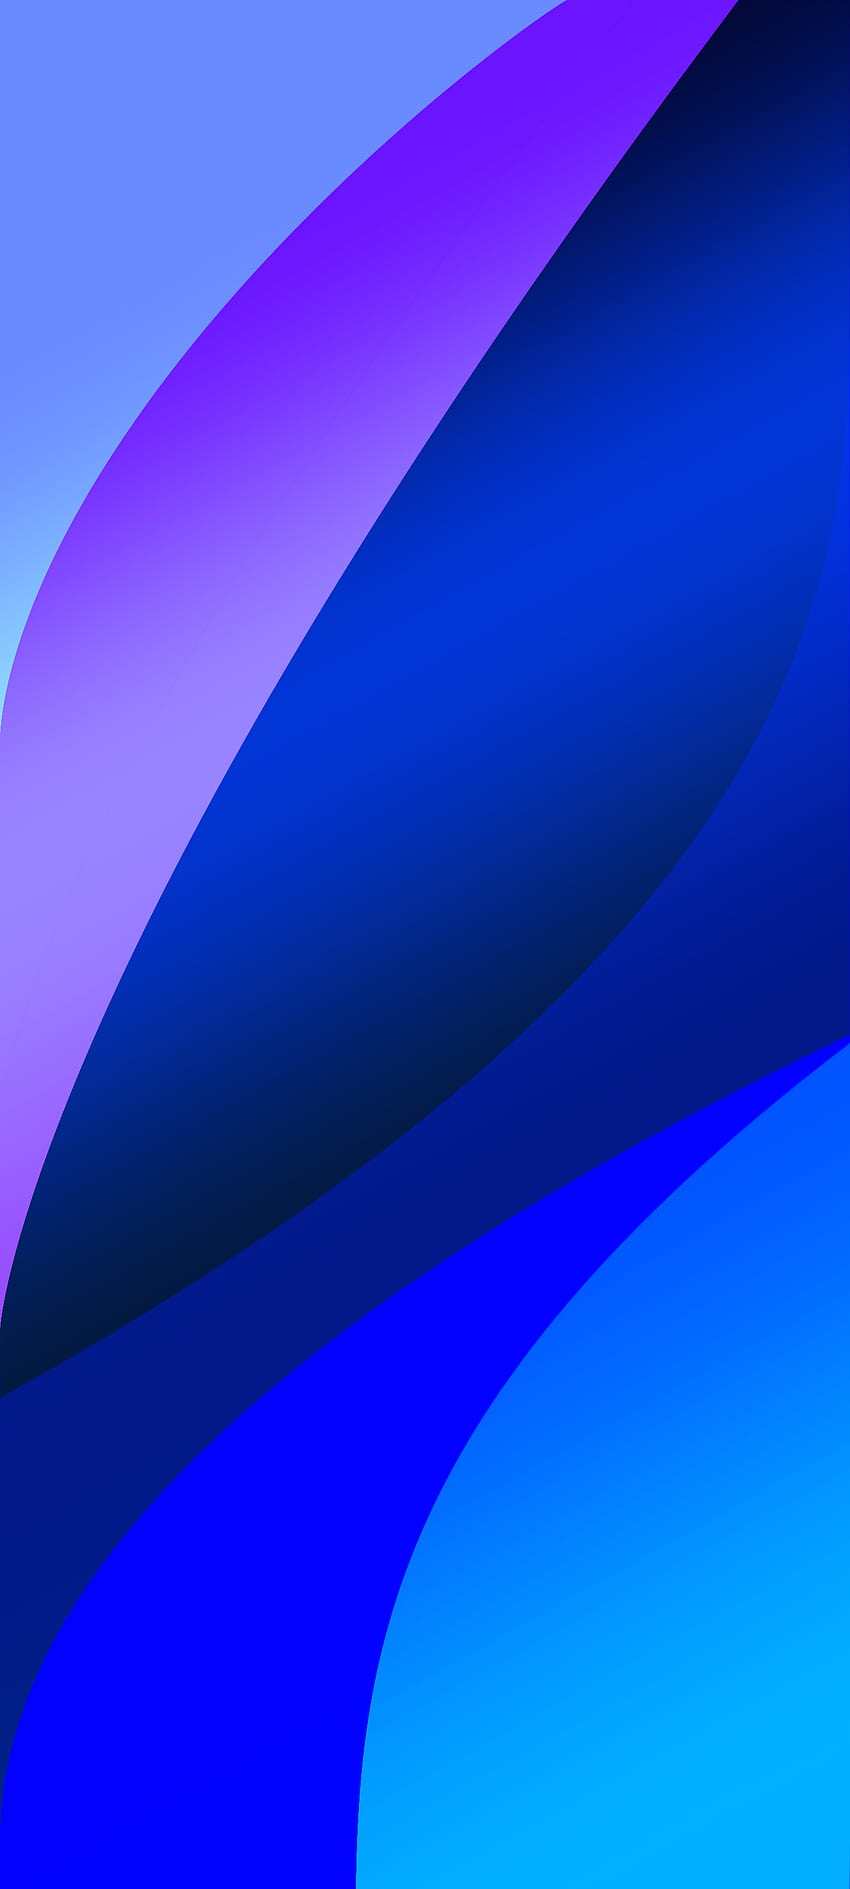 Brile 2, sky, electric blue, magenta, android, cool, ios, holiday, iphone, blue, background, dark, illustration, Samsung, galaxy, lines HD phone wallpaper